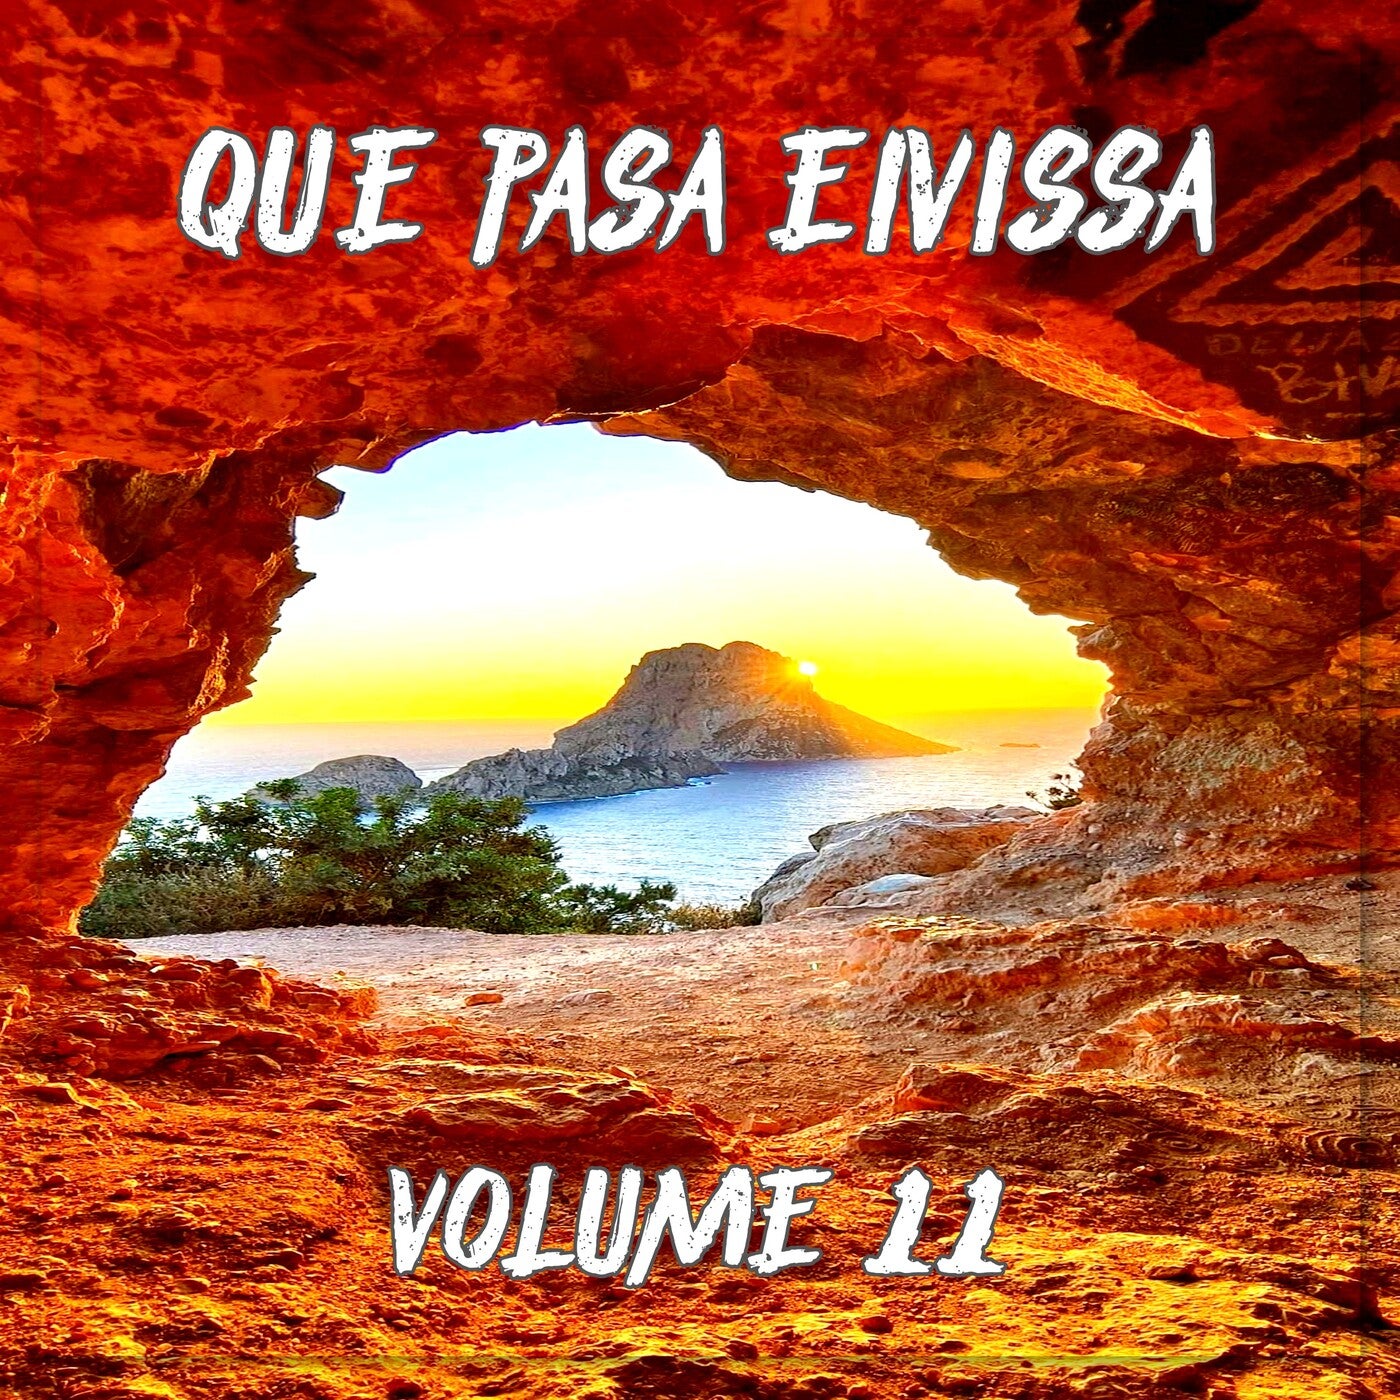 Que Pasa Eivissa, Vol.11 (BEST SELECTION OF BALEARIC LOUNGE & CHILL HOUSE TRACKS)